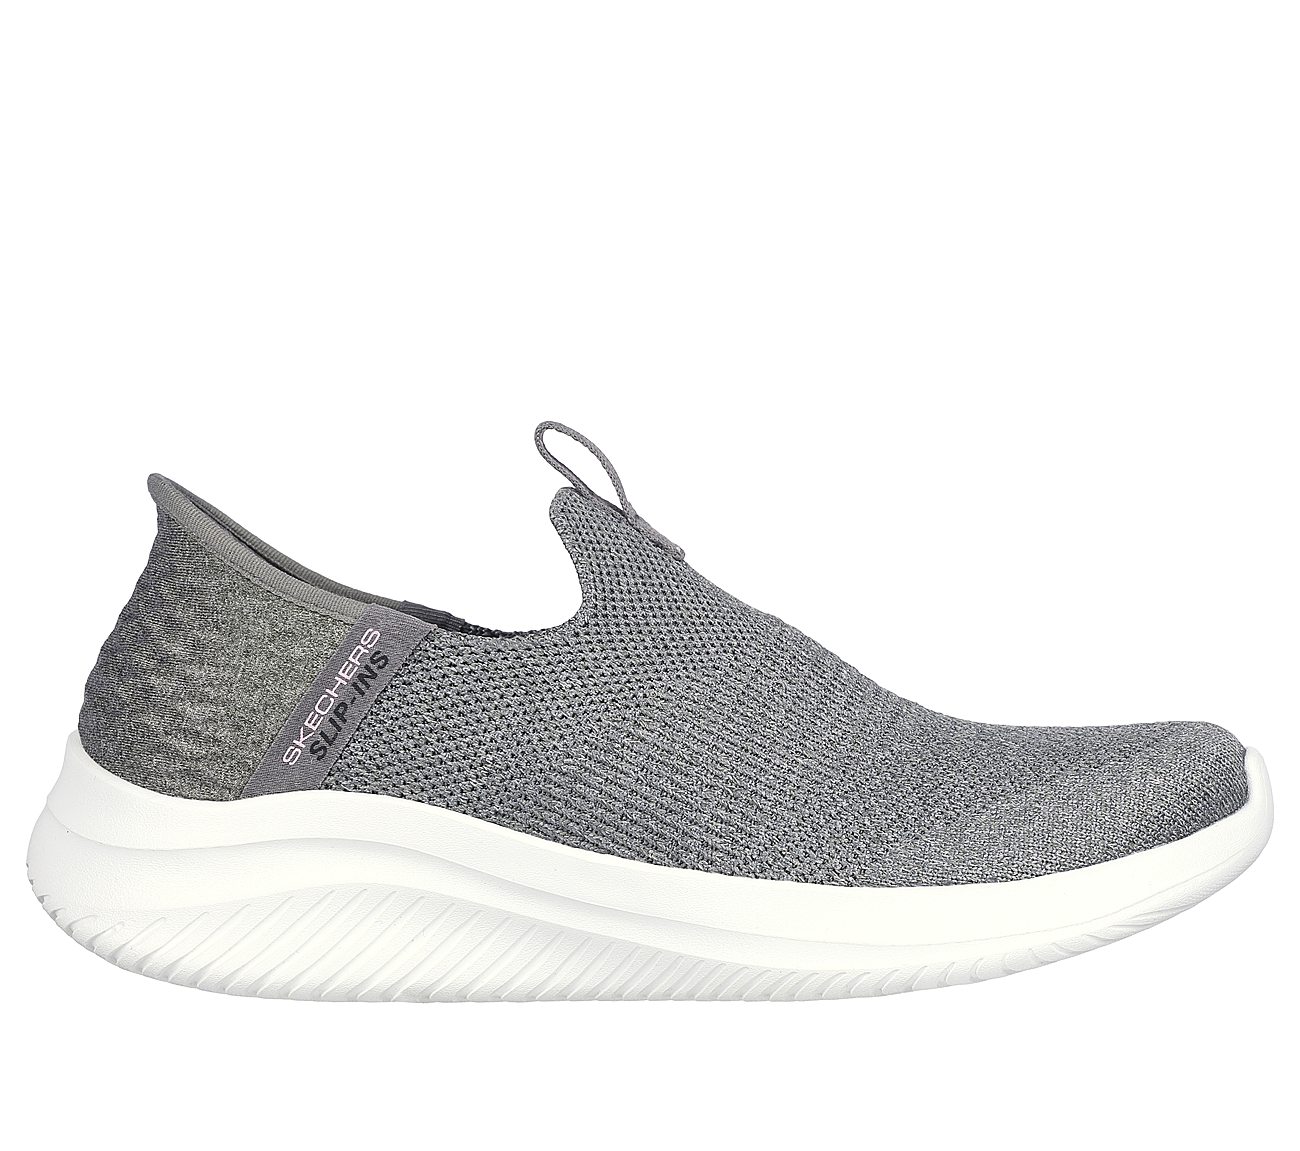 ULTRA FLEX 3.0-SMOOTH STEP, GREY Footwear Lateral View